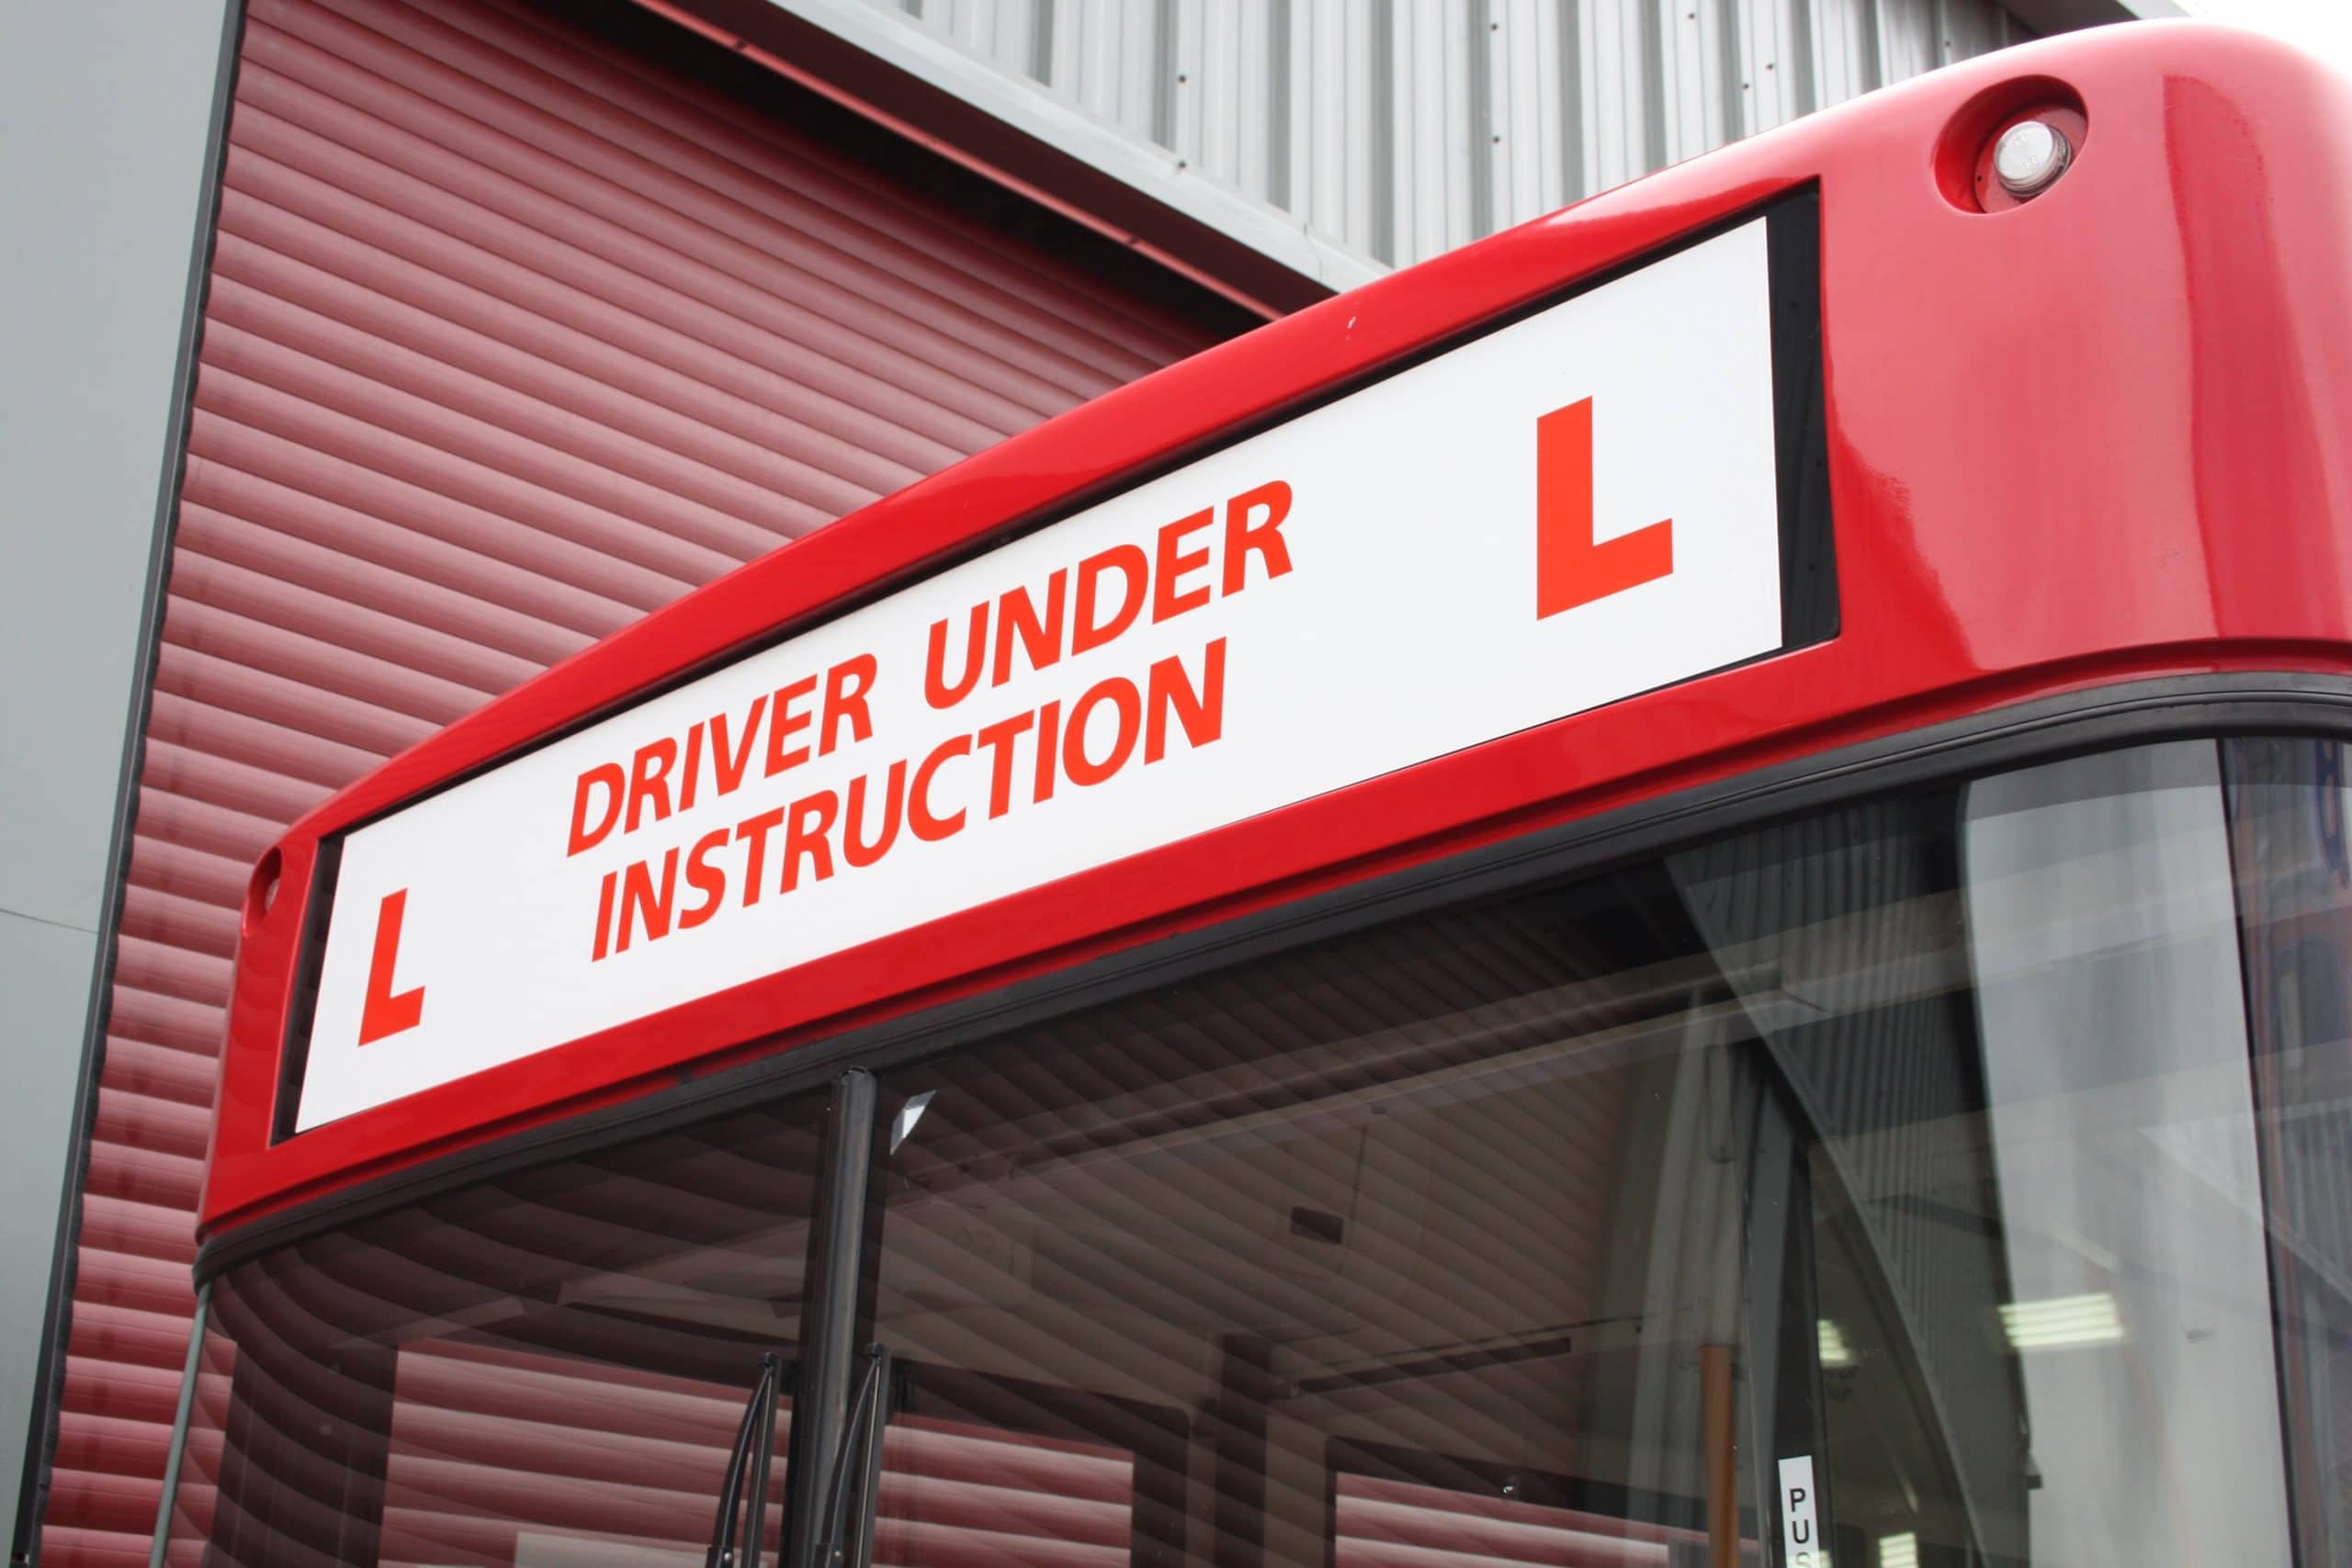 Vocational driving test appointments going unsold, DVSA claims